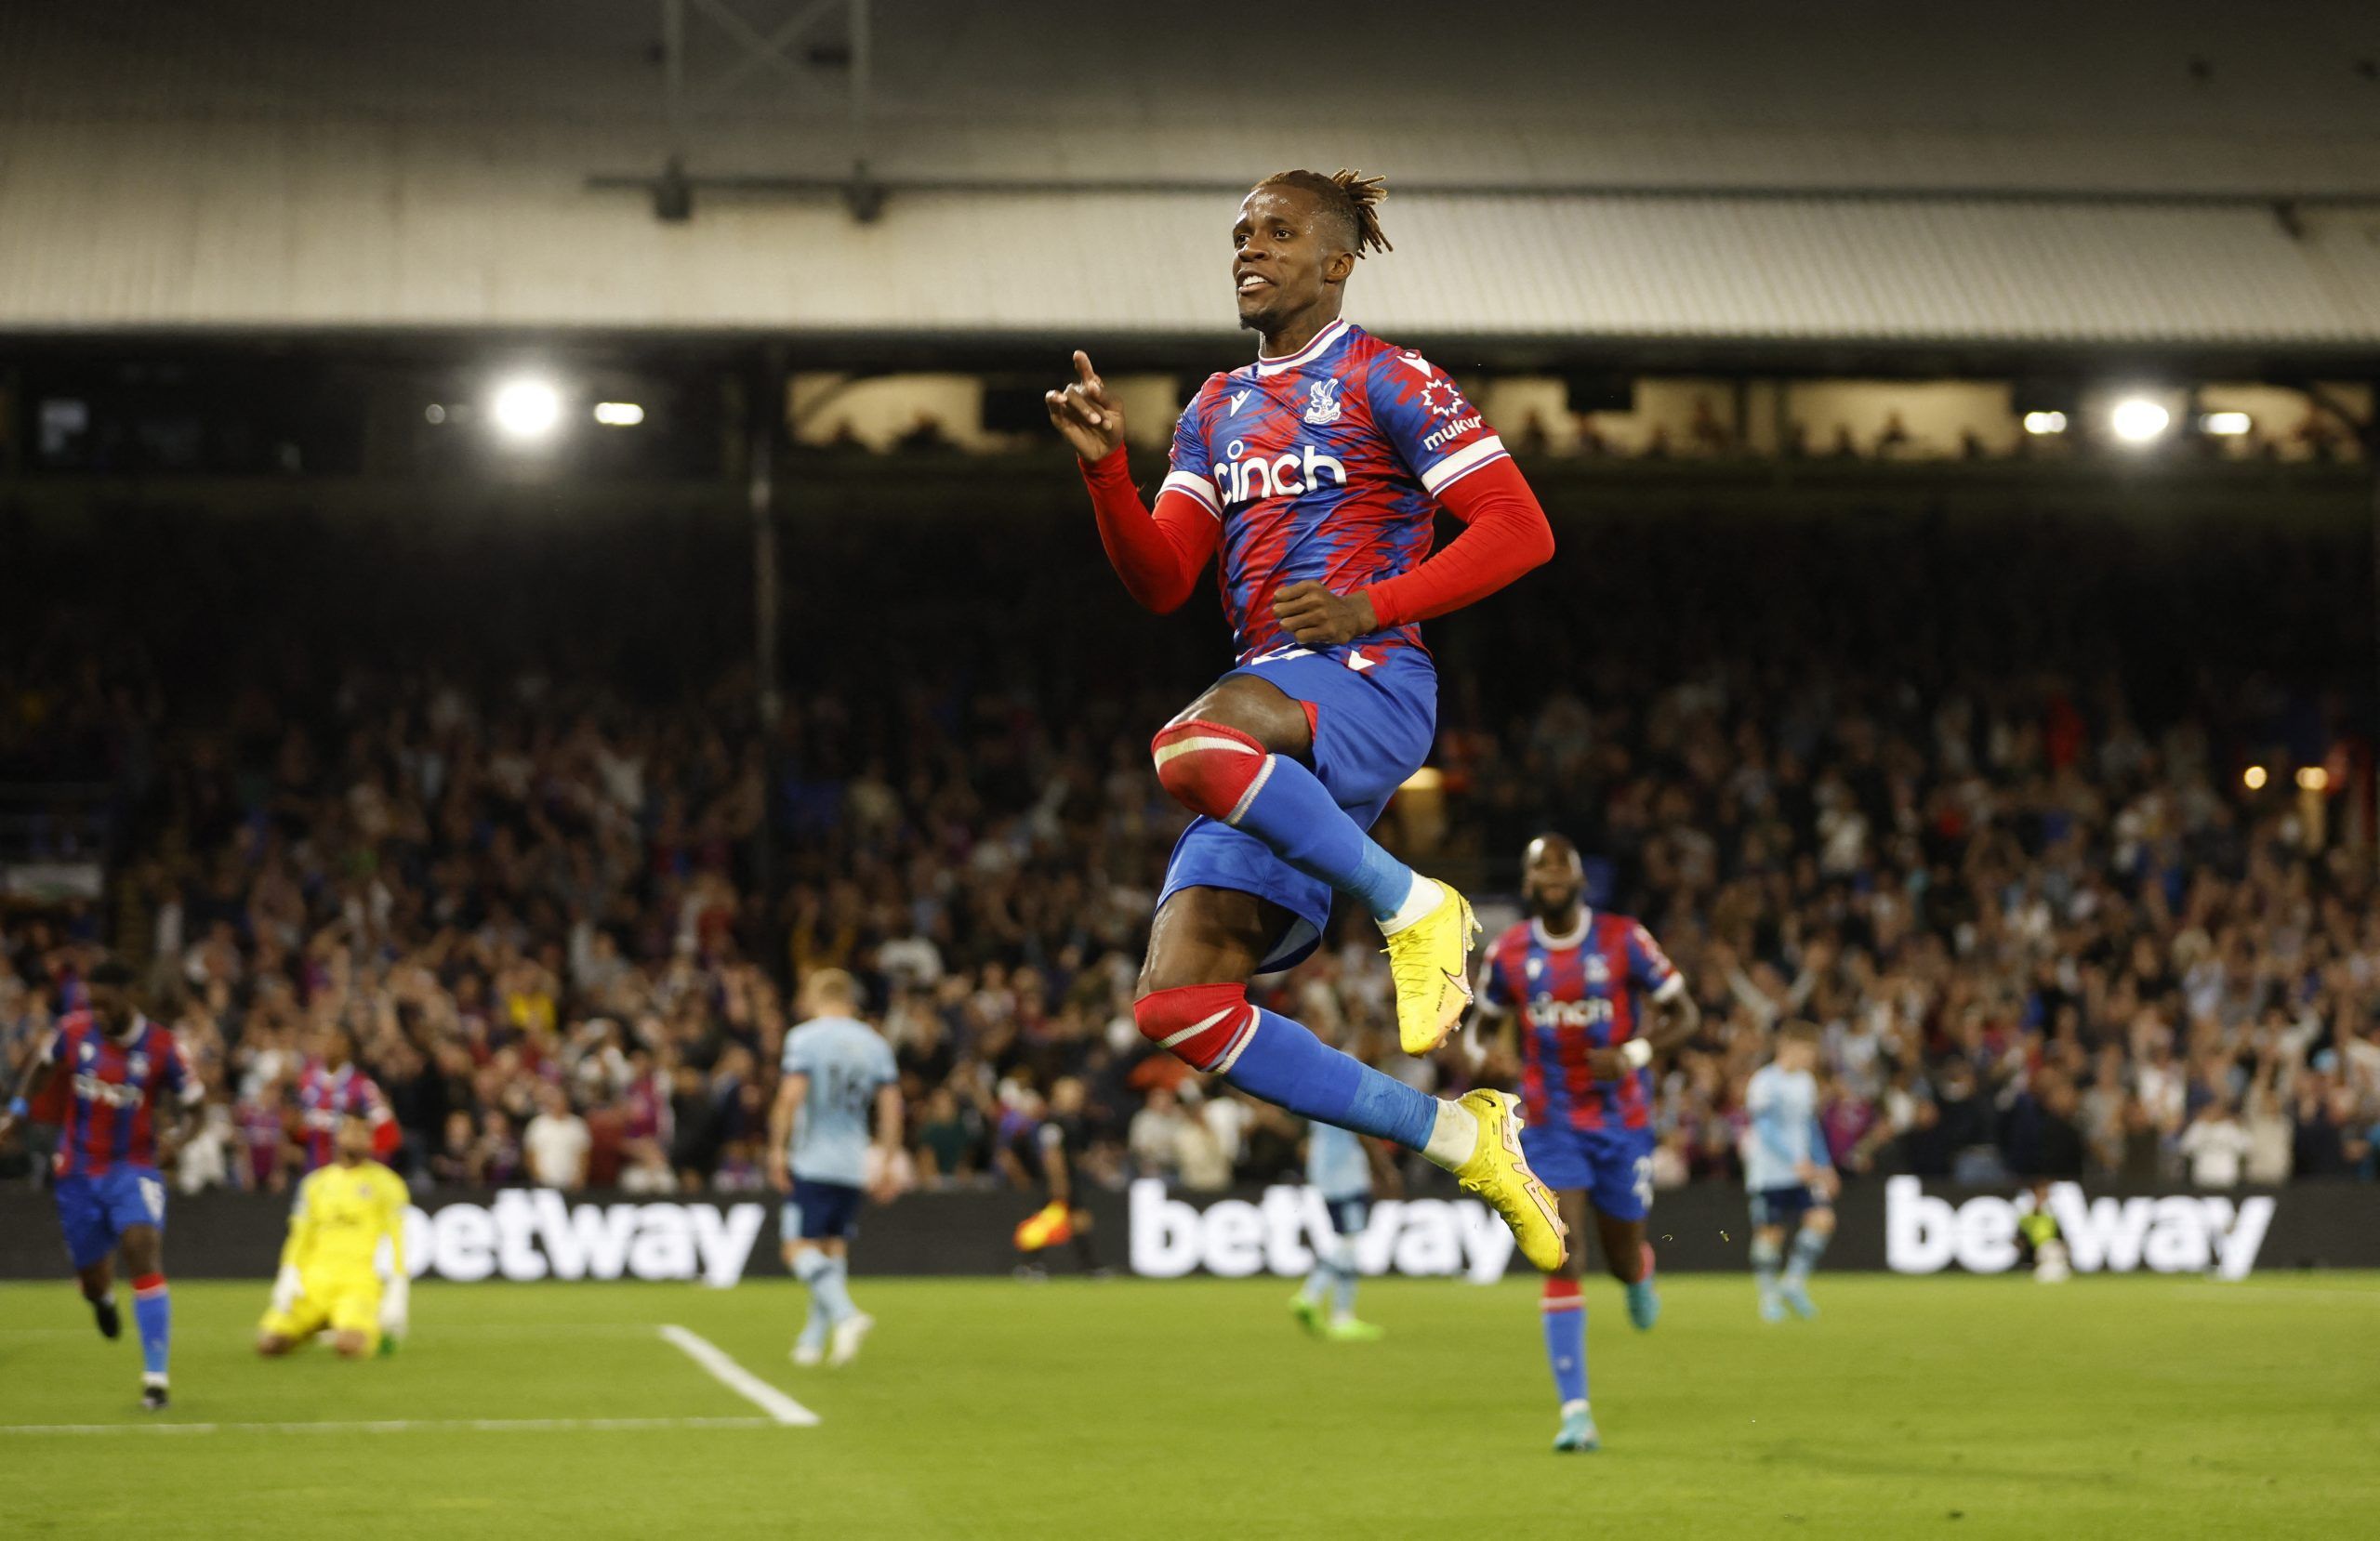 Soccer Football - Premier League - Crystal Palace v Brentford - Selhurst Park, London, Britain - August 30, 2022 Crystal Palace's Wilfried Zaha celebrates scoring their first goal Action Images via Reuters/Peter Cziborra EDITORIAL USE ONLY. No use with unauthorized audio, video, data, fixture lists, club/league logos or 'live' services. Online in-match use limited to 75 images, no video emulation. No use in betting, games or single club /league/player publications.  Please contact your account r